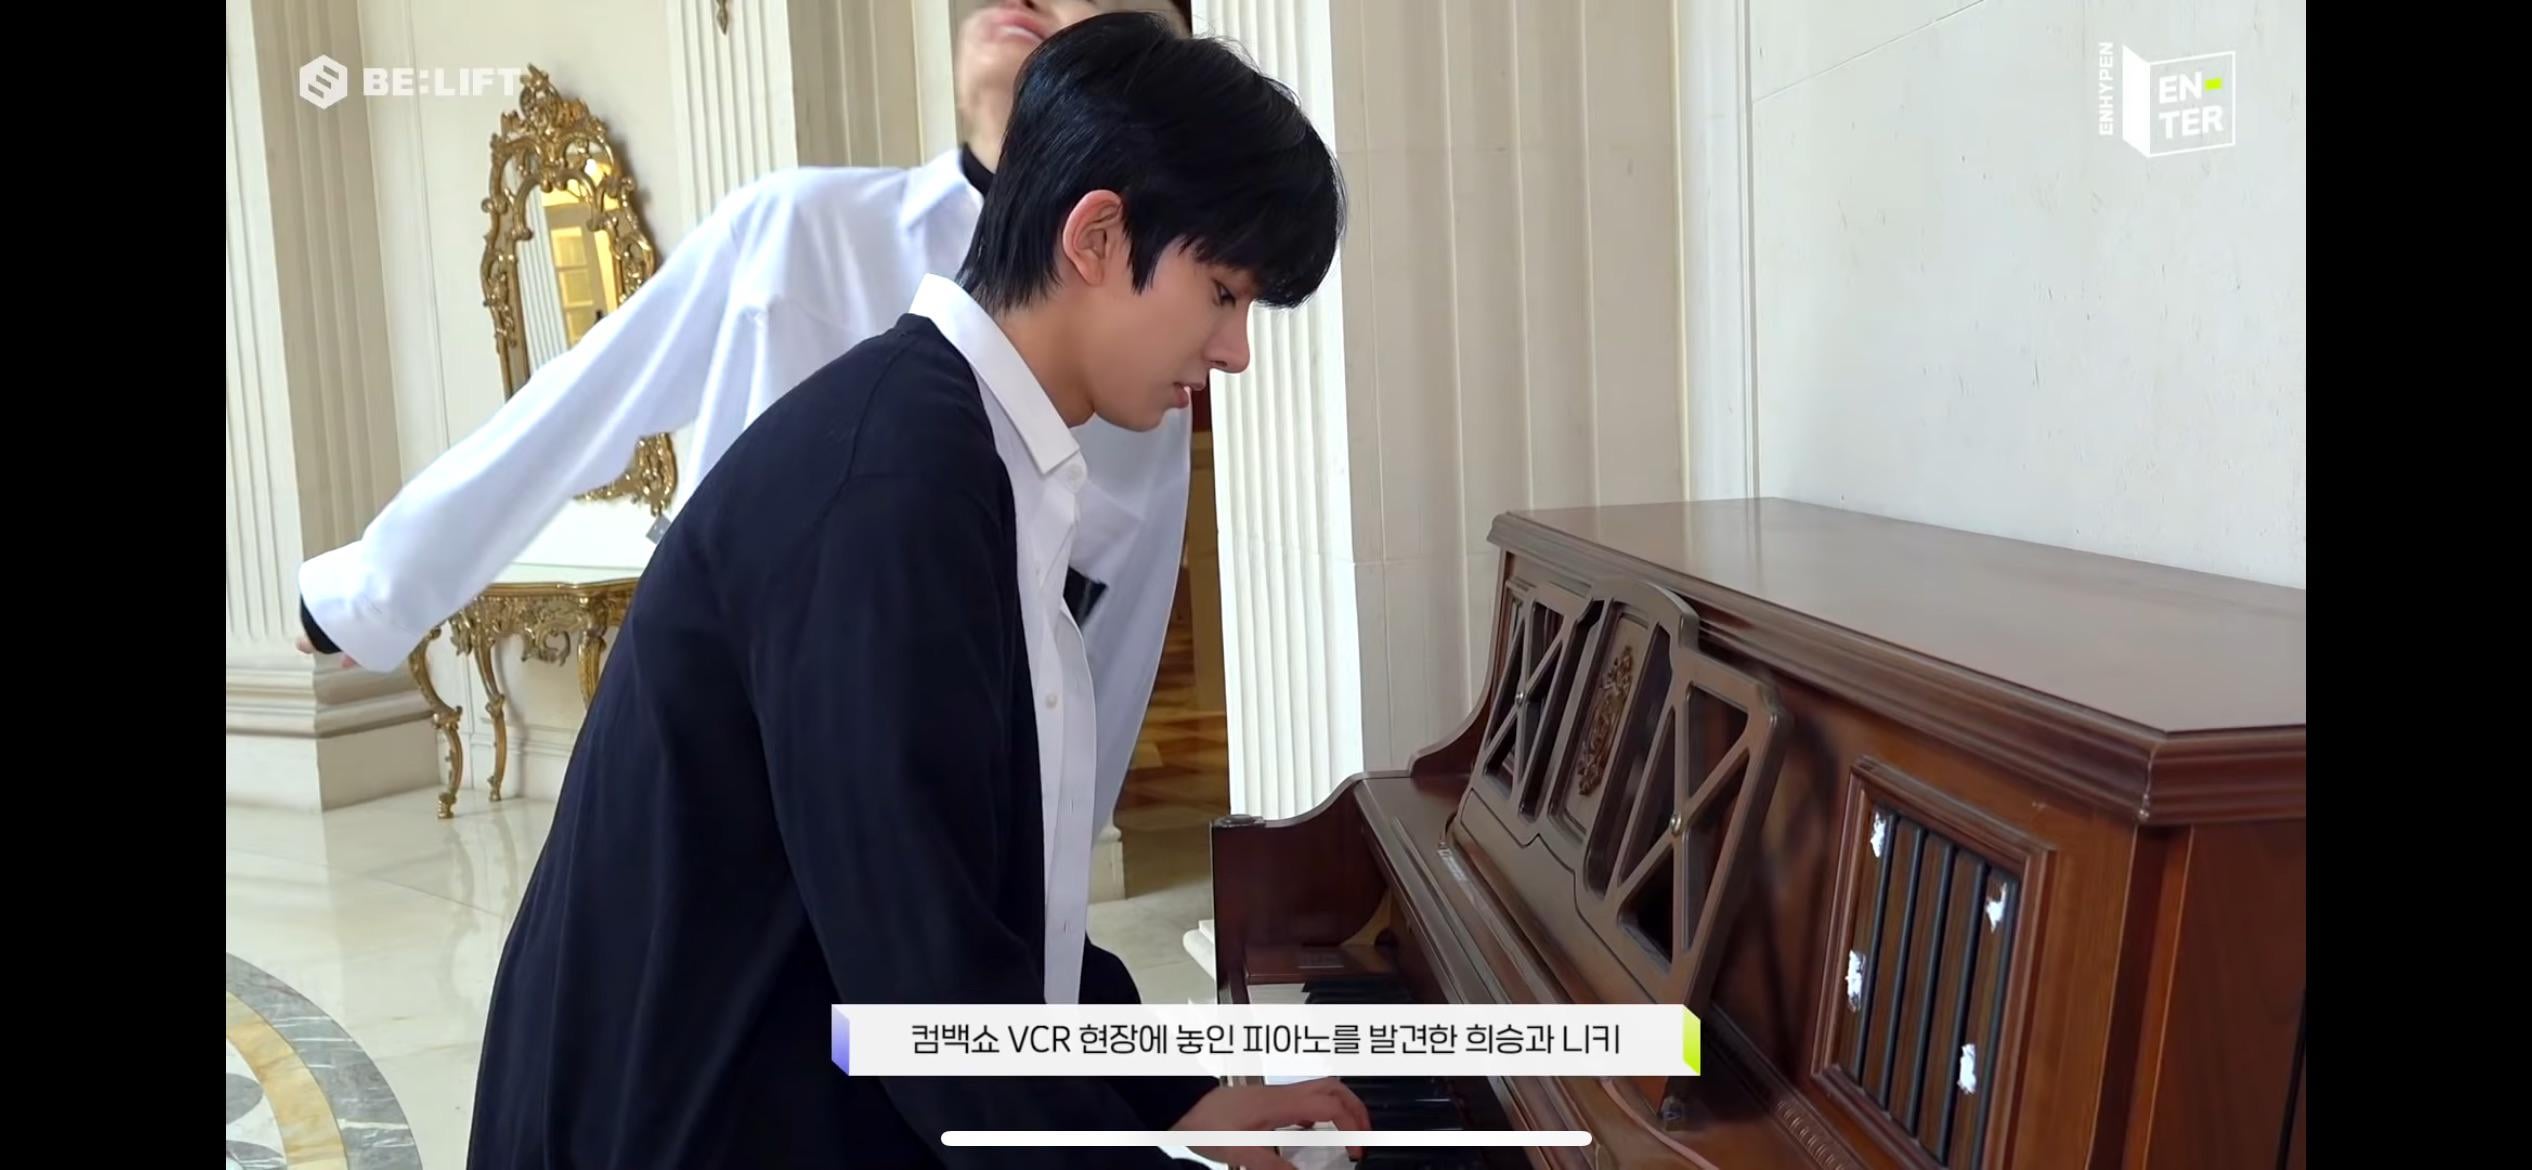 Where is this piano?